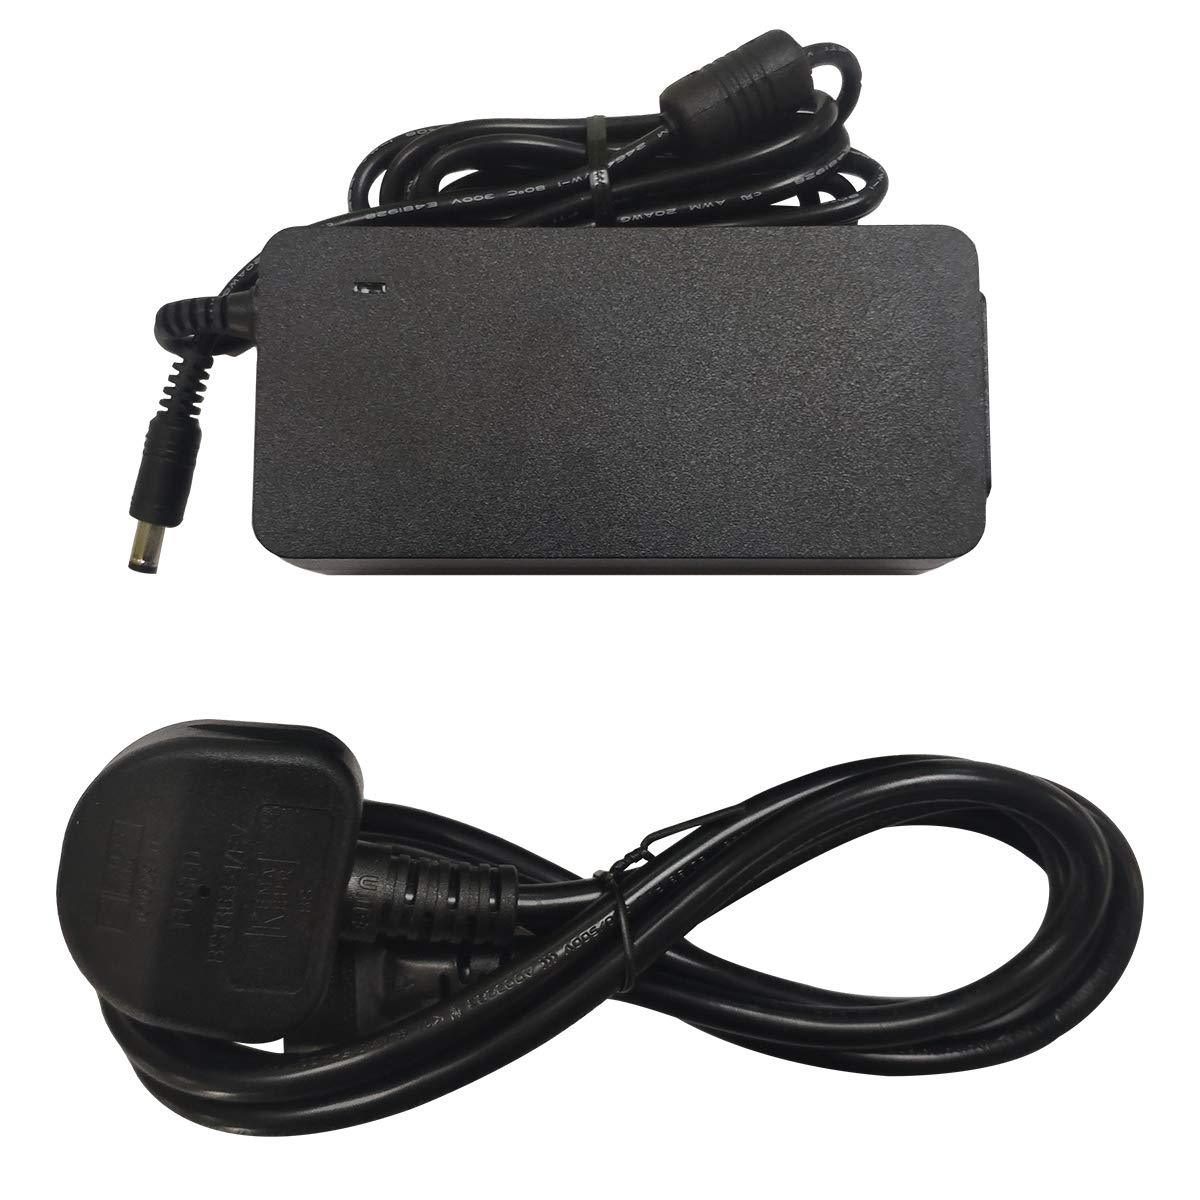 GAOMON - Power Adapter & Power Cord for PD2200 Pen Display ONLY